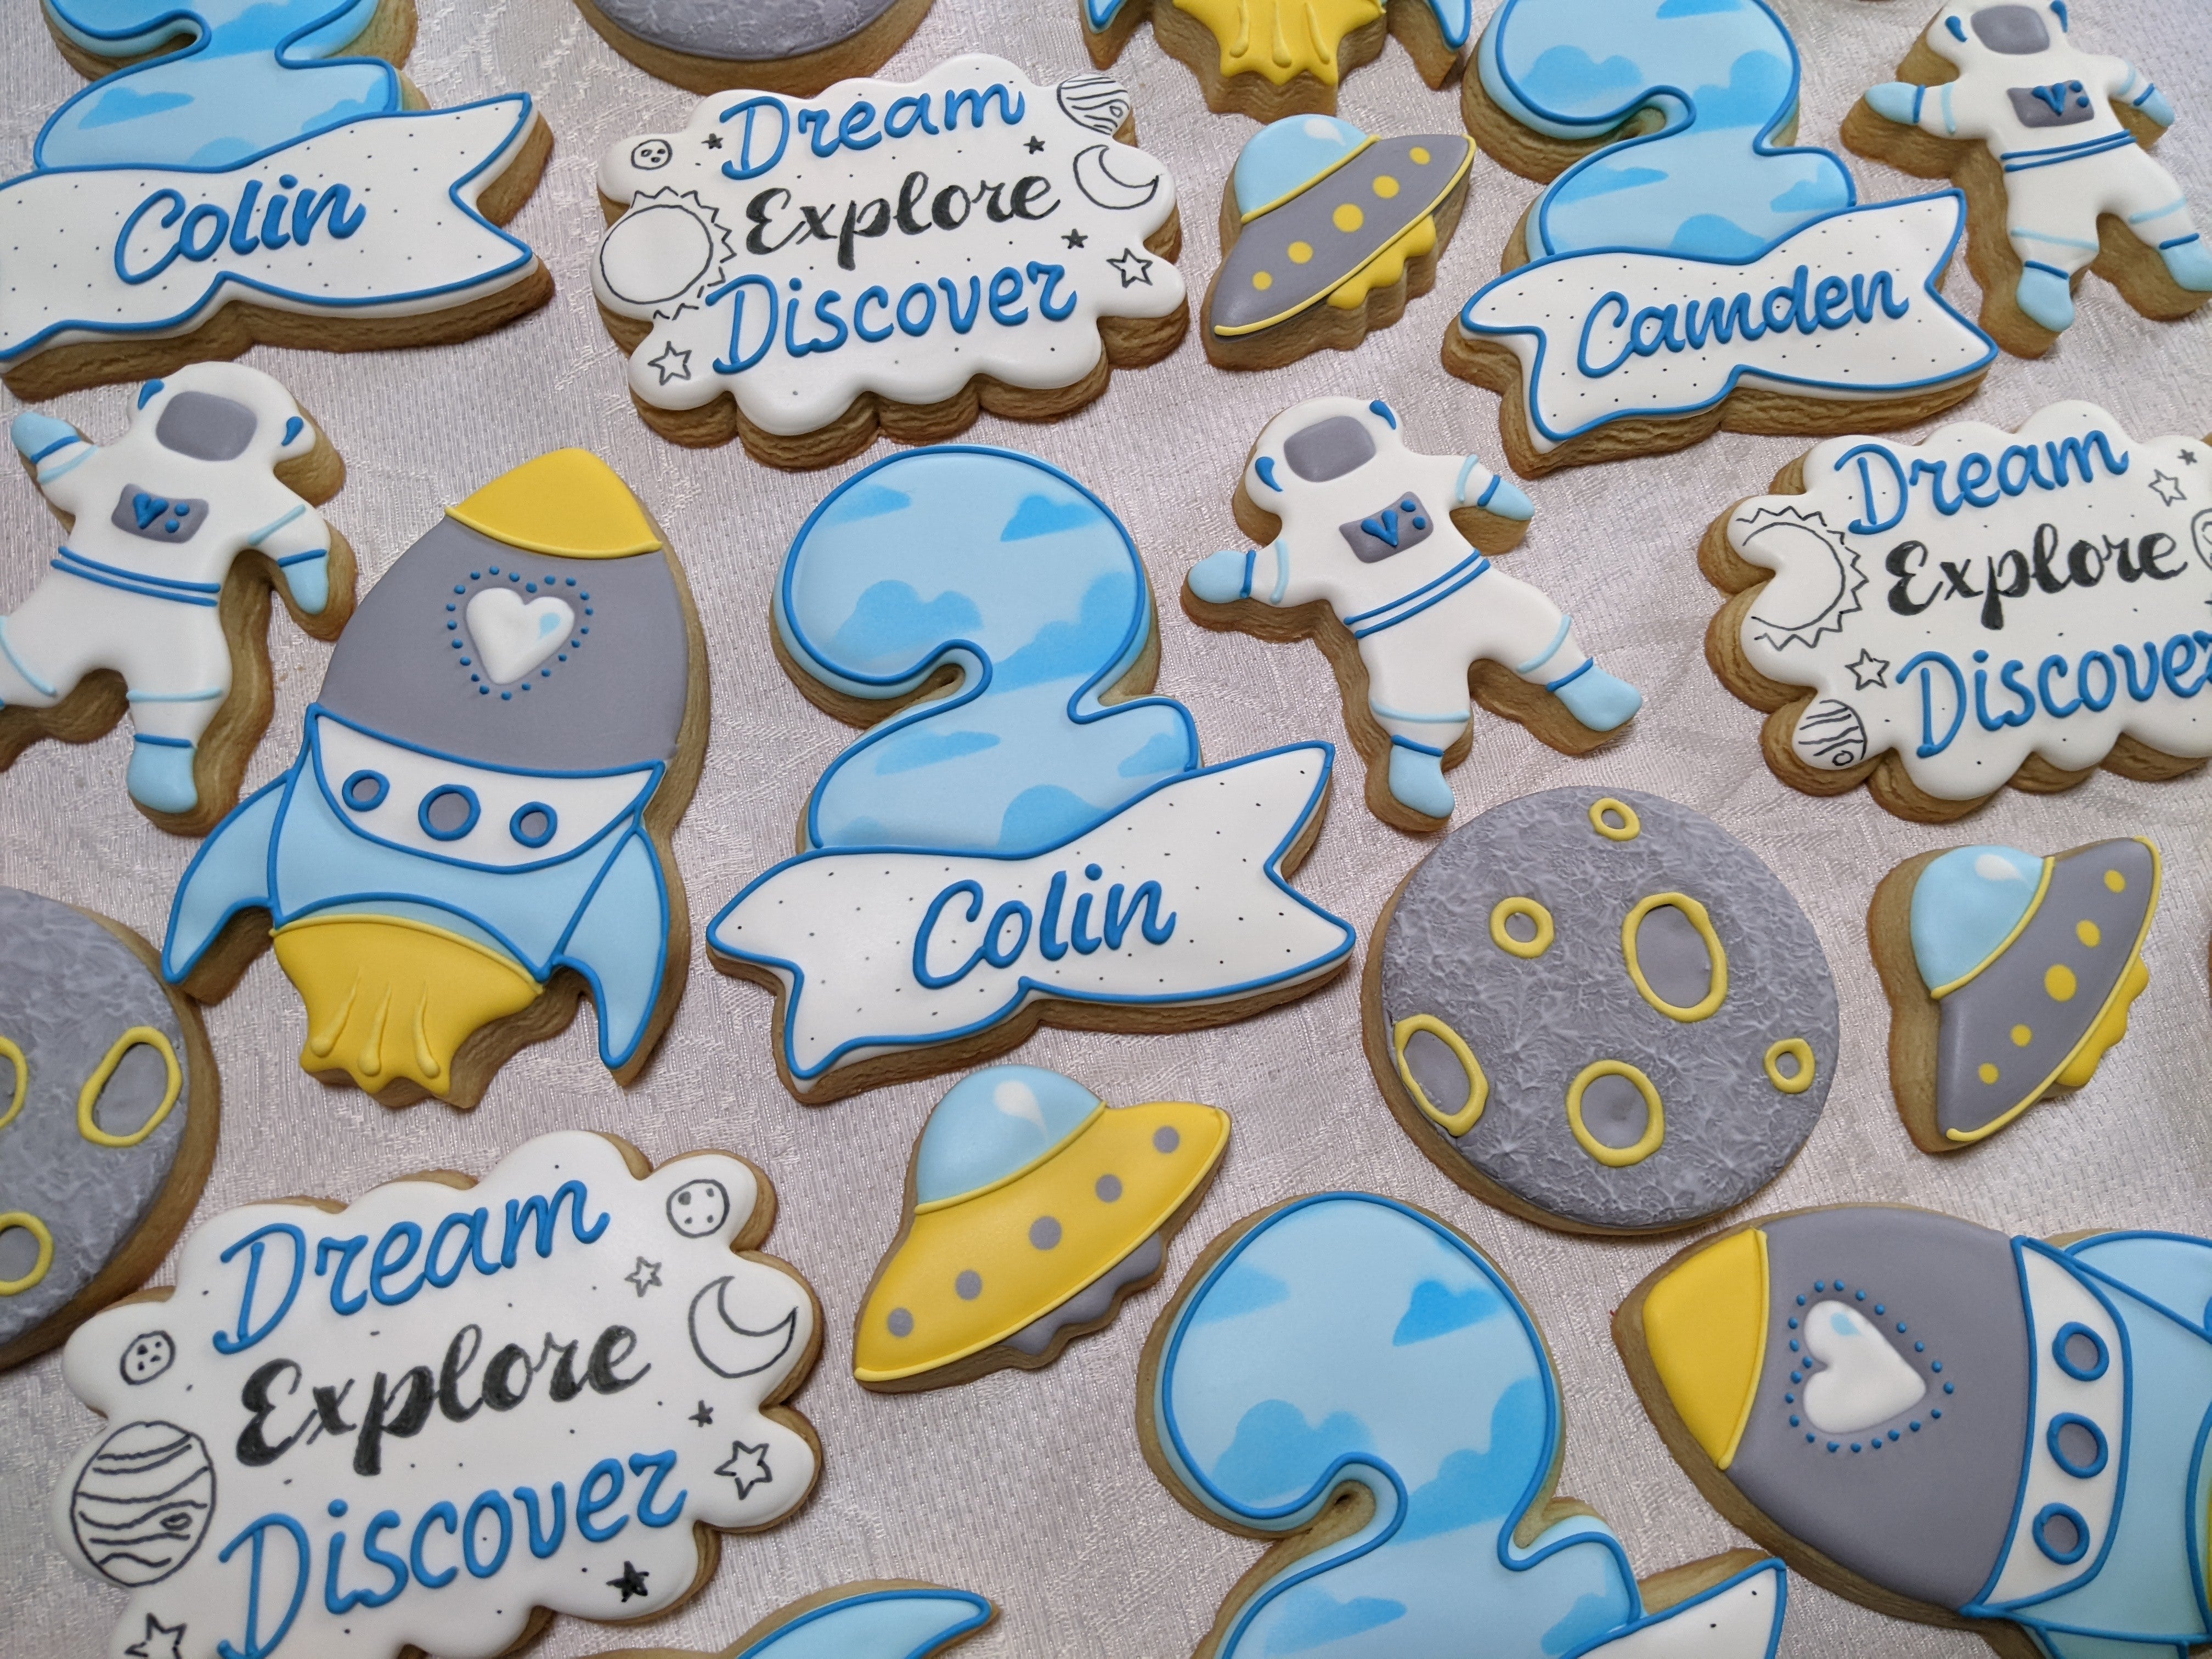 Astronaut Space Voyage Personalized Birthday Boy 24 Decorated Cookies